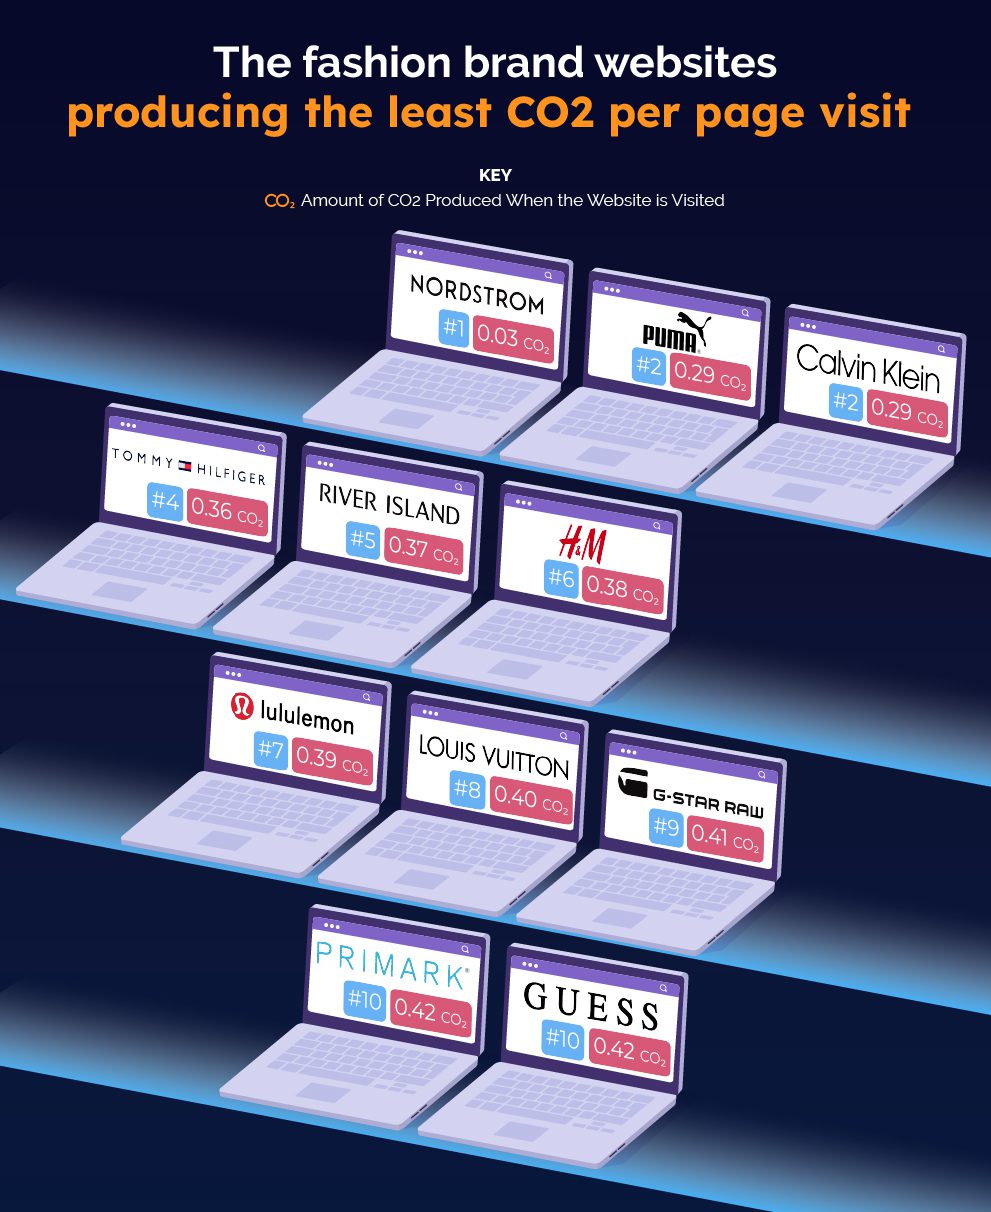 The fashion brand websites producing the least CO2 per page visit